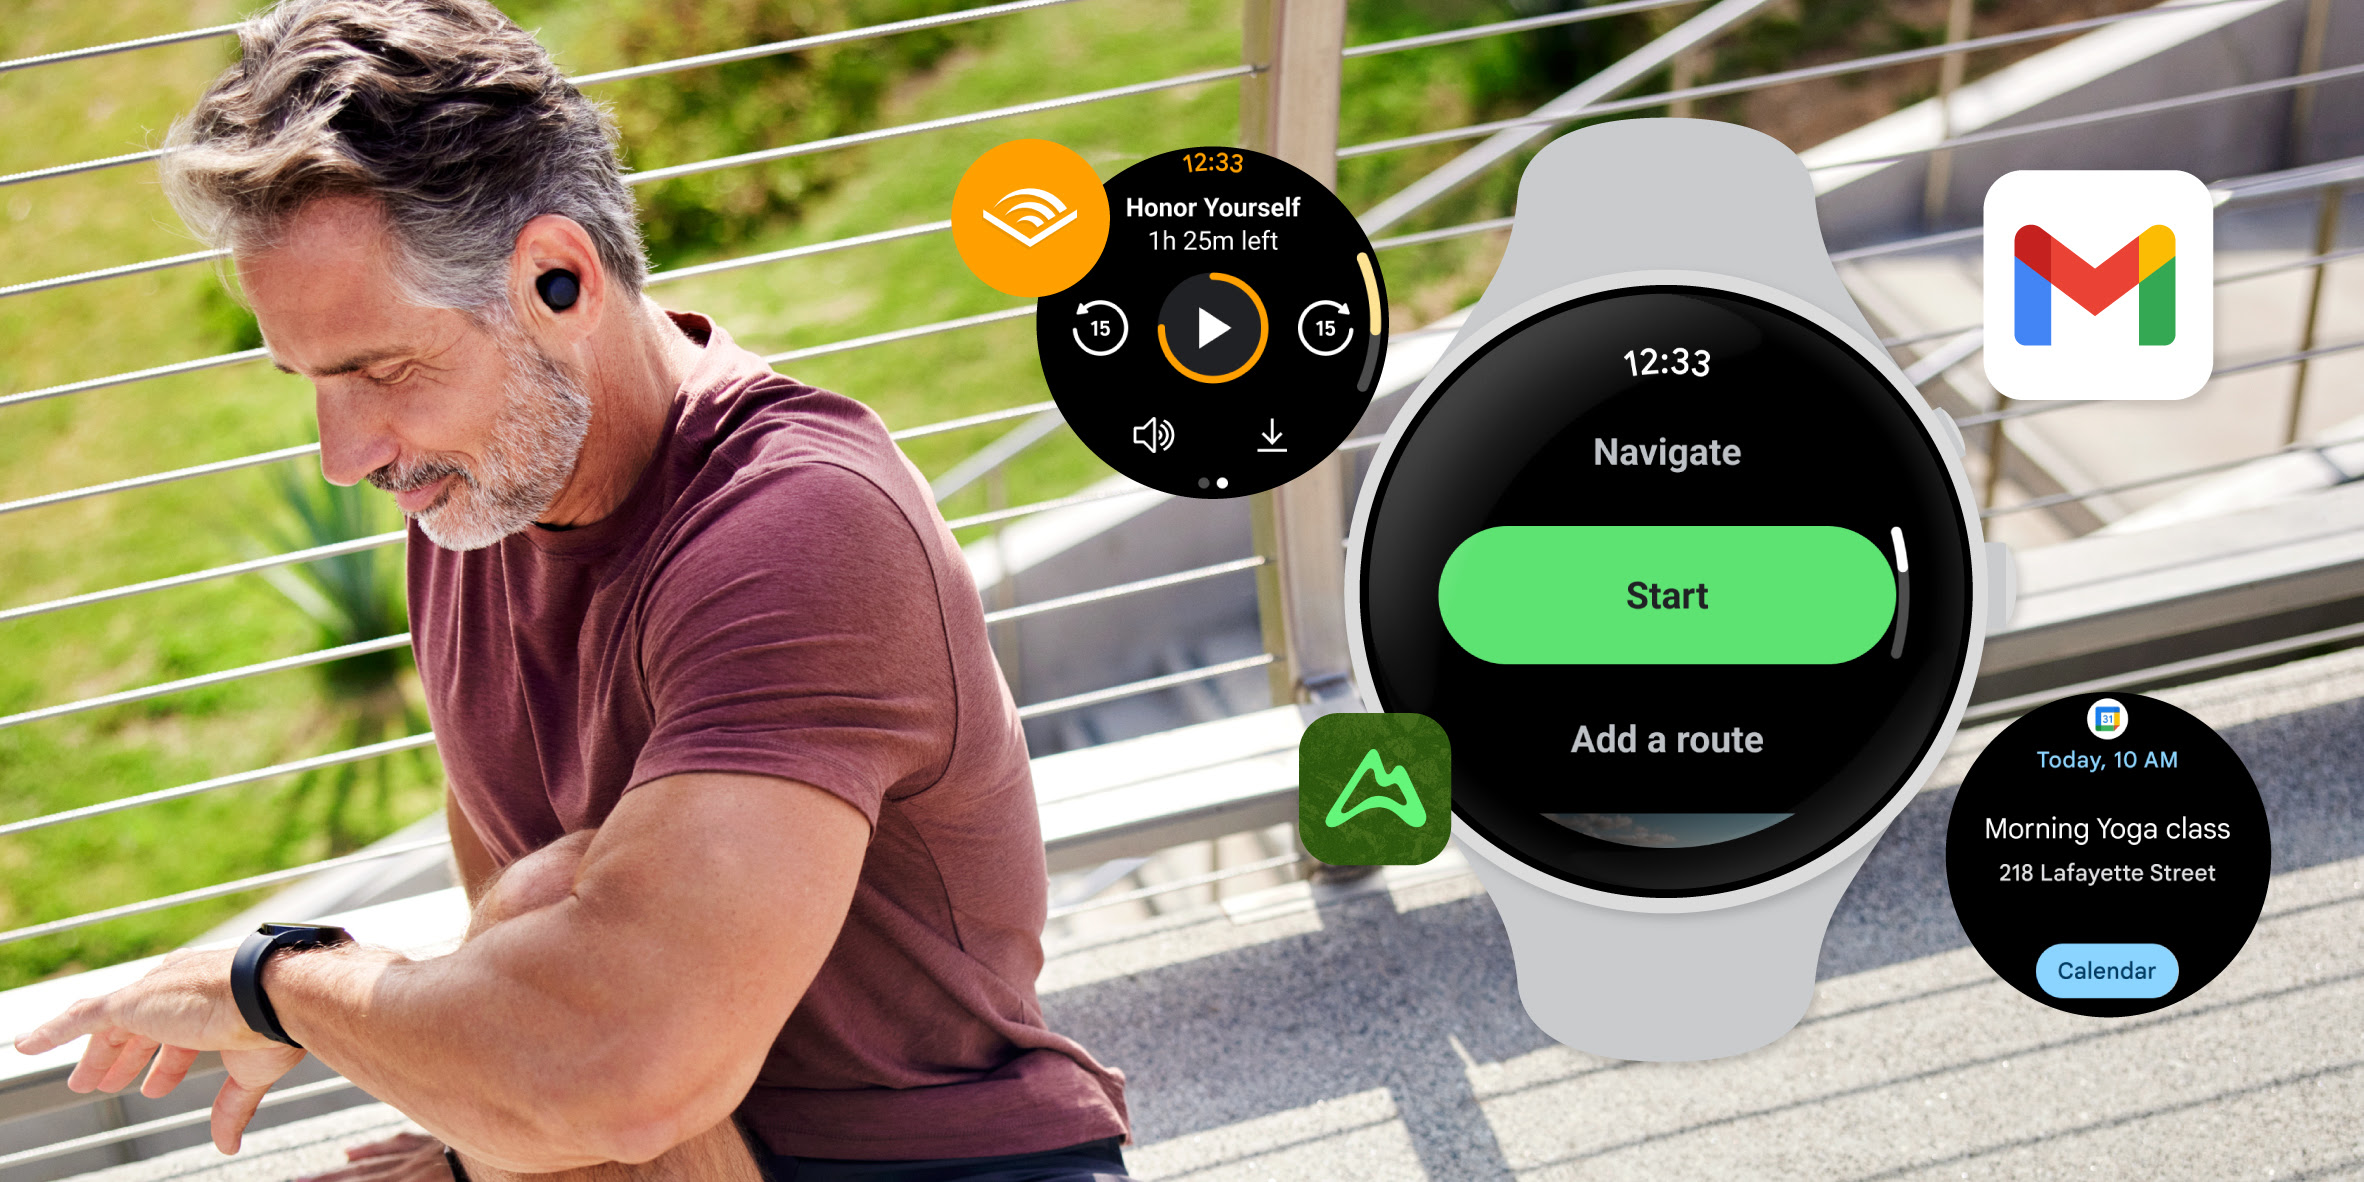 How to Add Apps to a Samsung Galaxy Watch